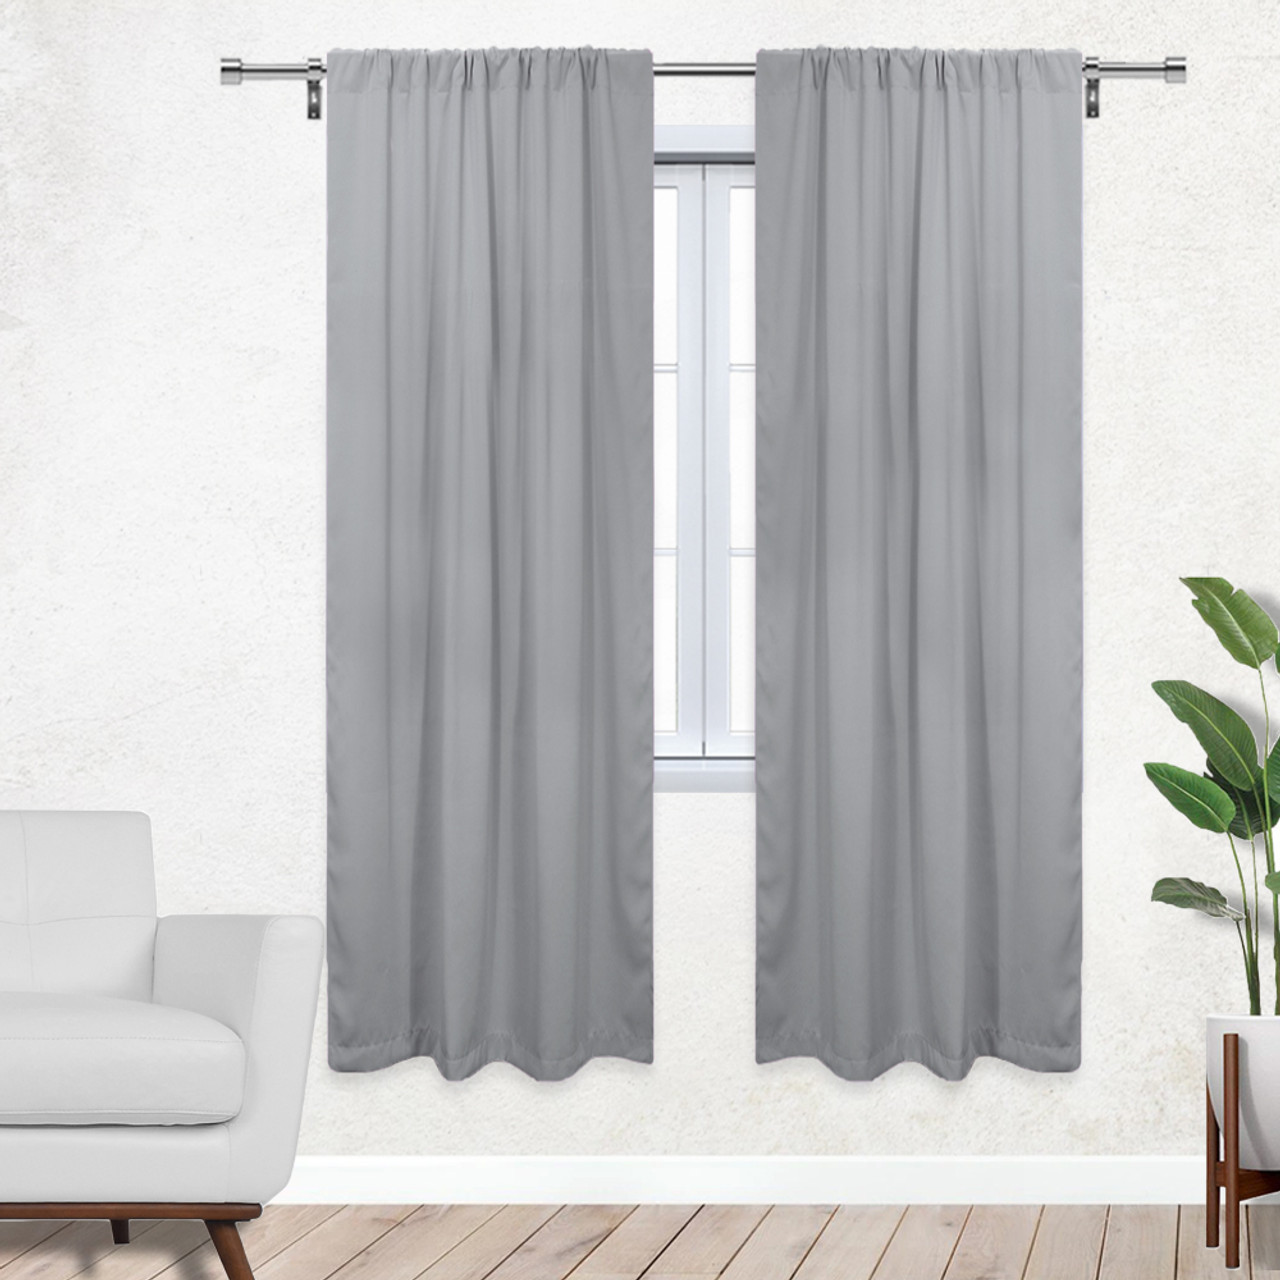 42 X 84 Inch Blackout Polyester Curtains with Rod Pockets Gray - 2 Panels |  Your Chair Covers Inc